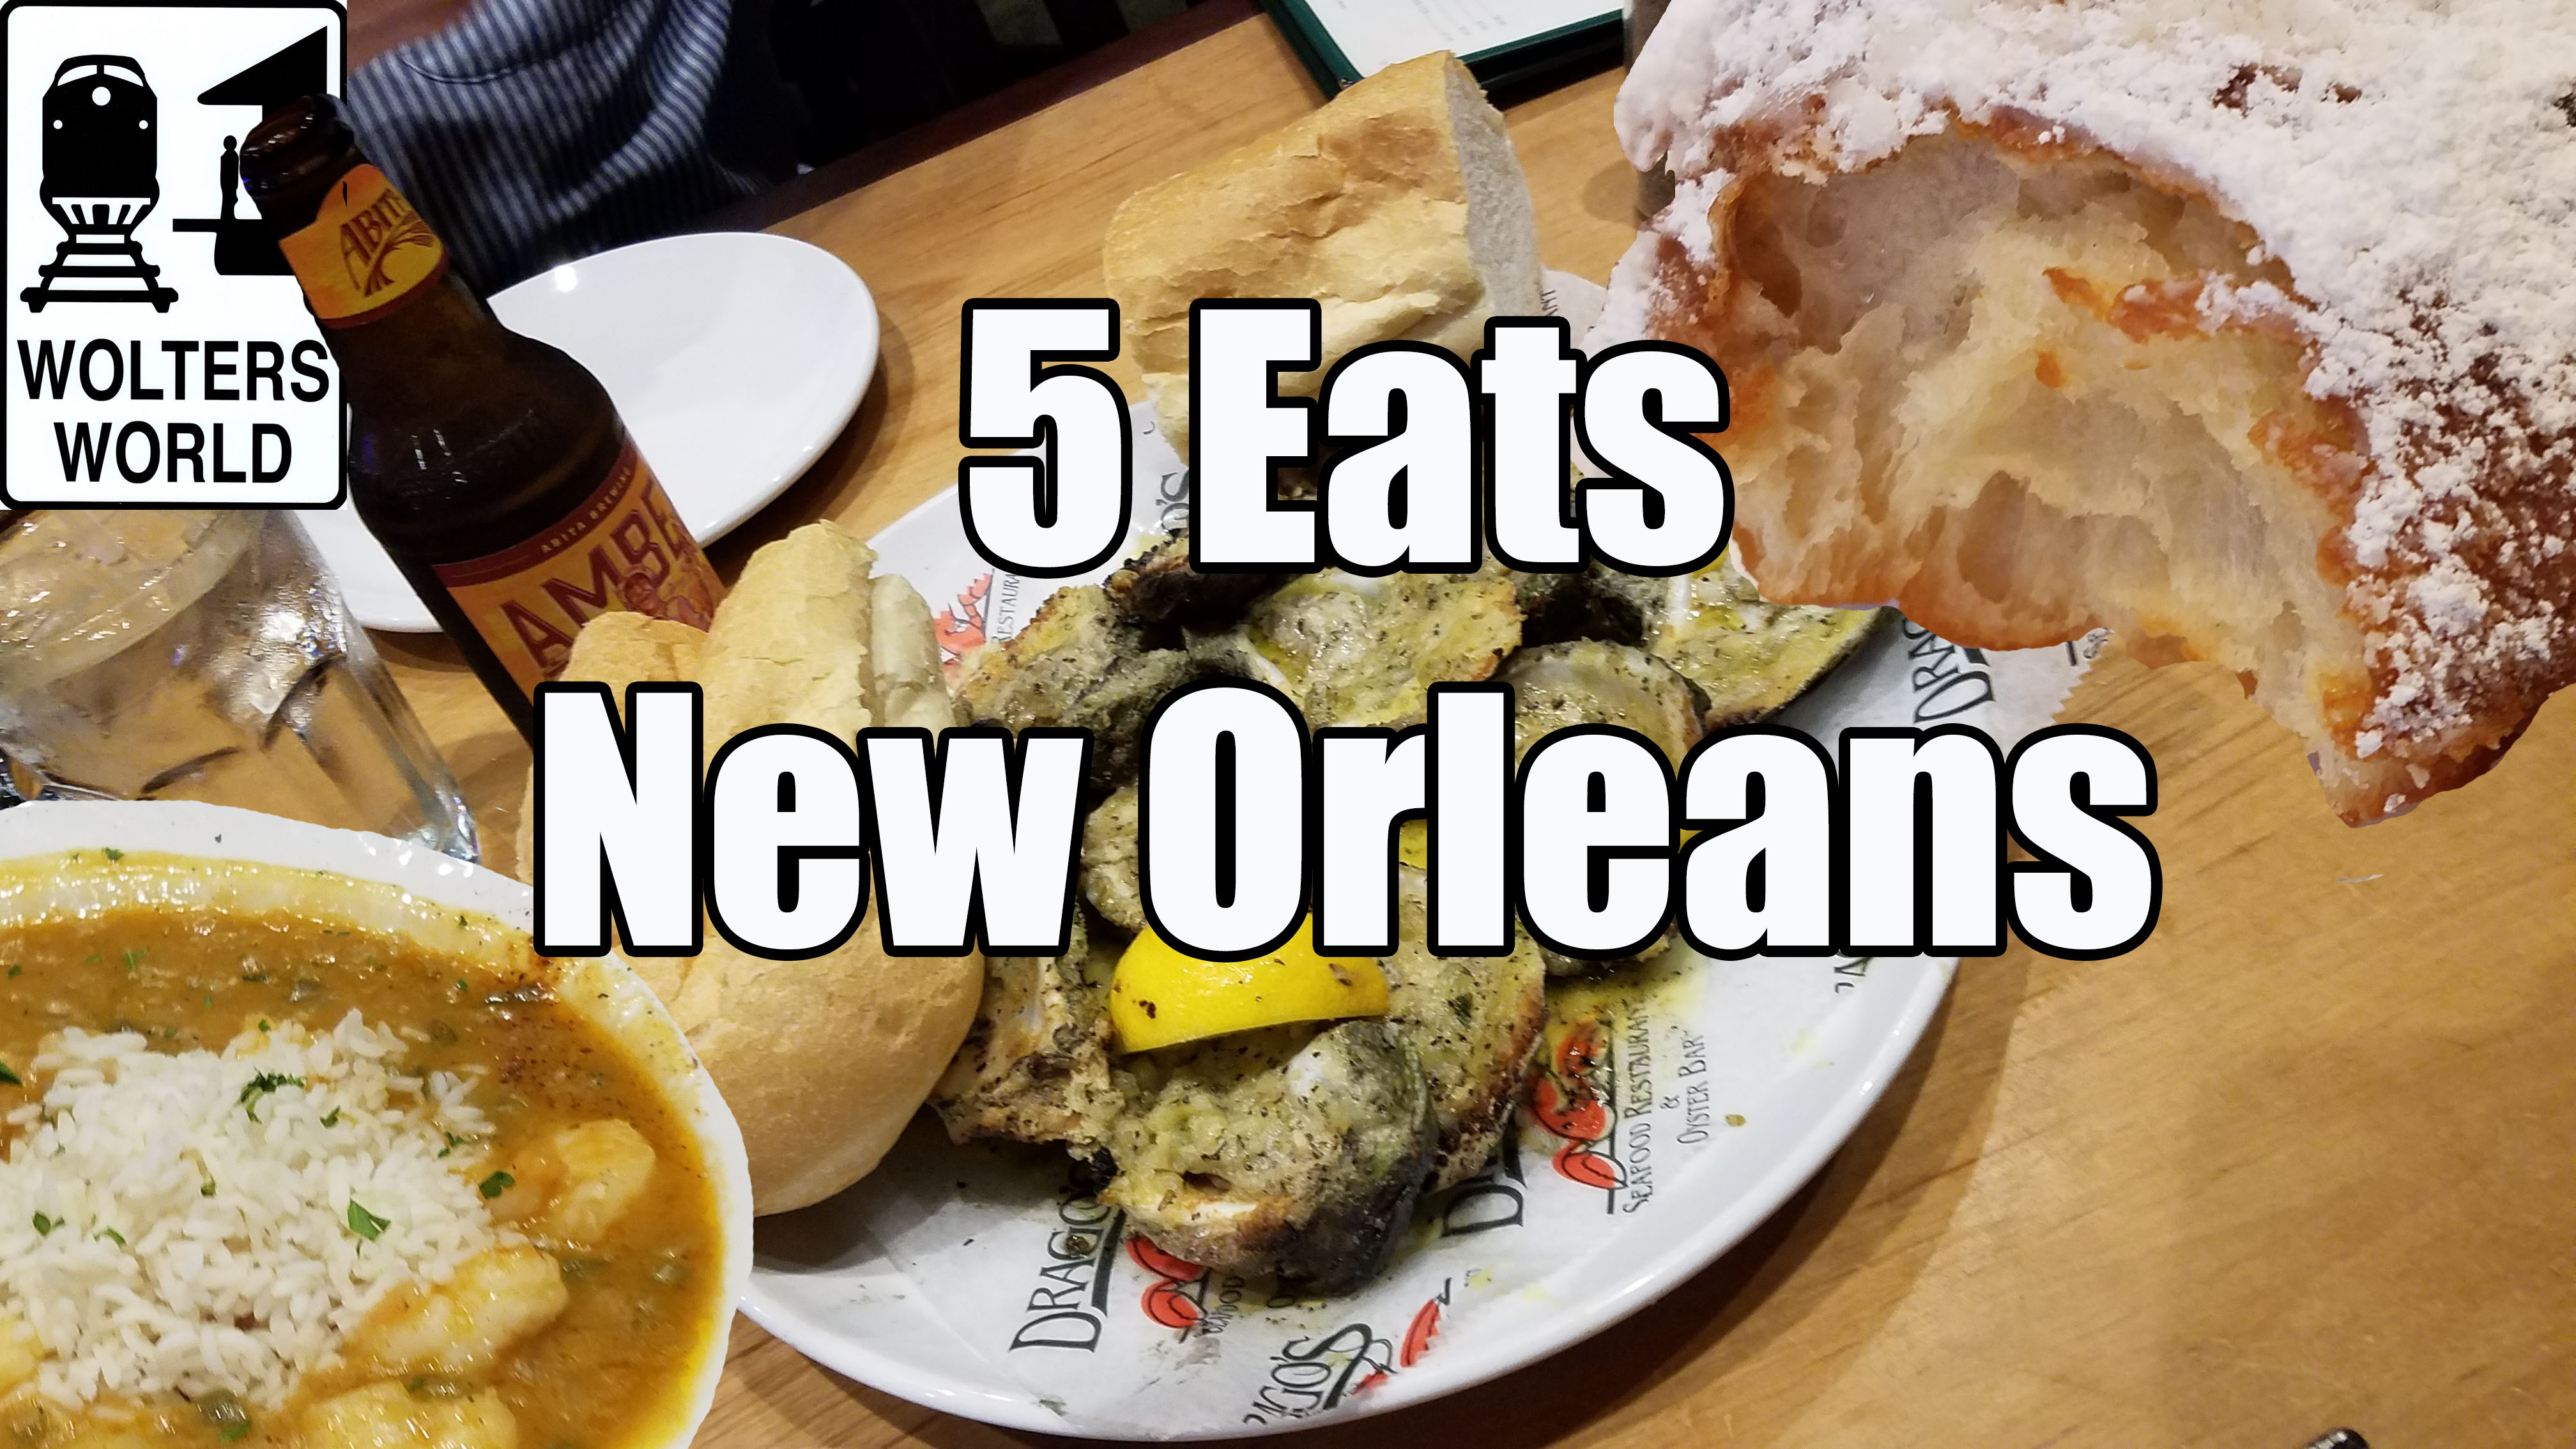 5 Things You MUST EAT in New Orleans - Wolters World